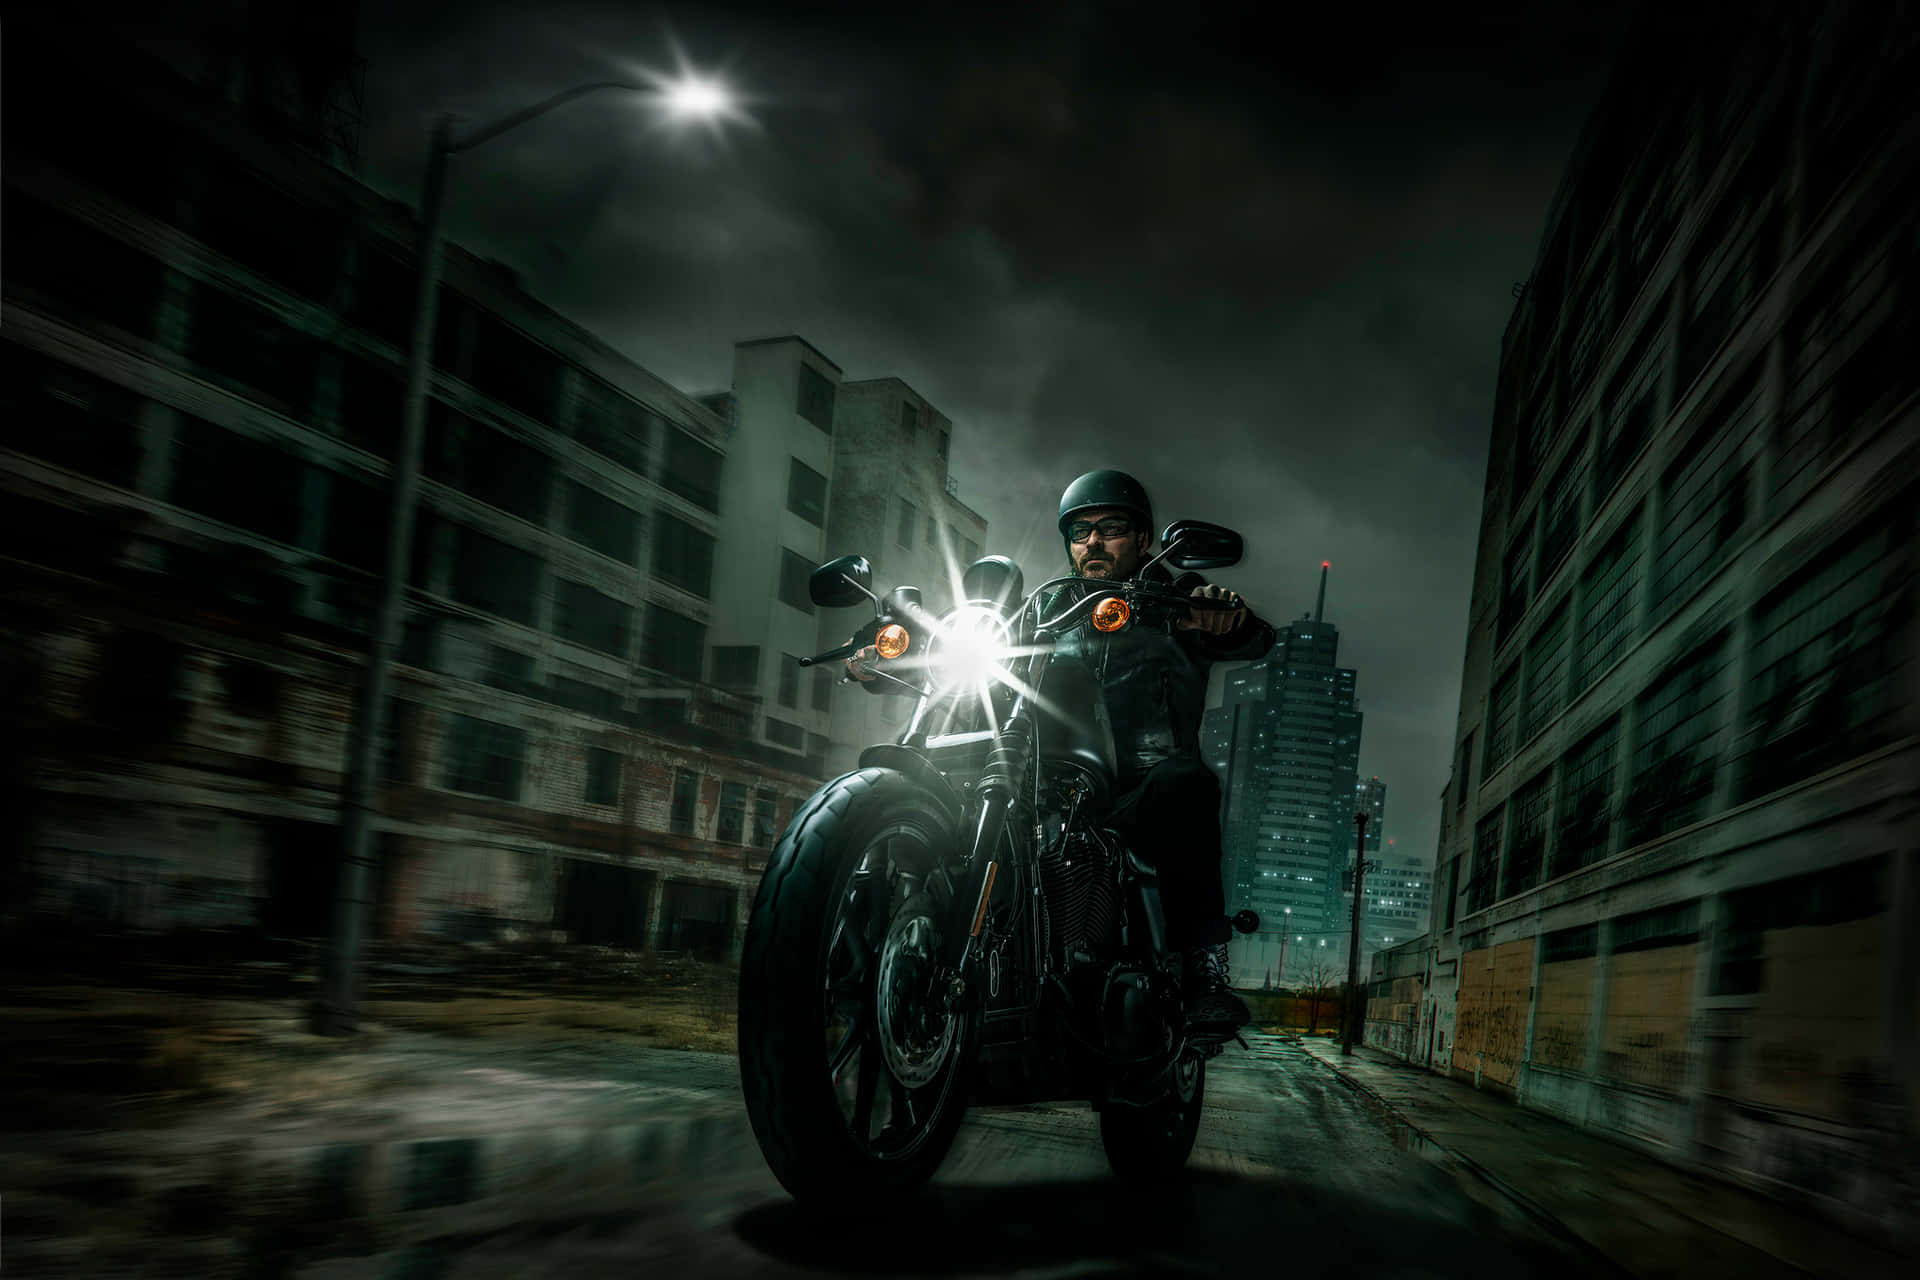 Harley Davidson Motorcycle And A Man Driver Background